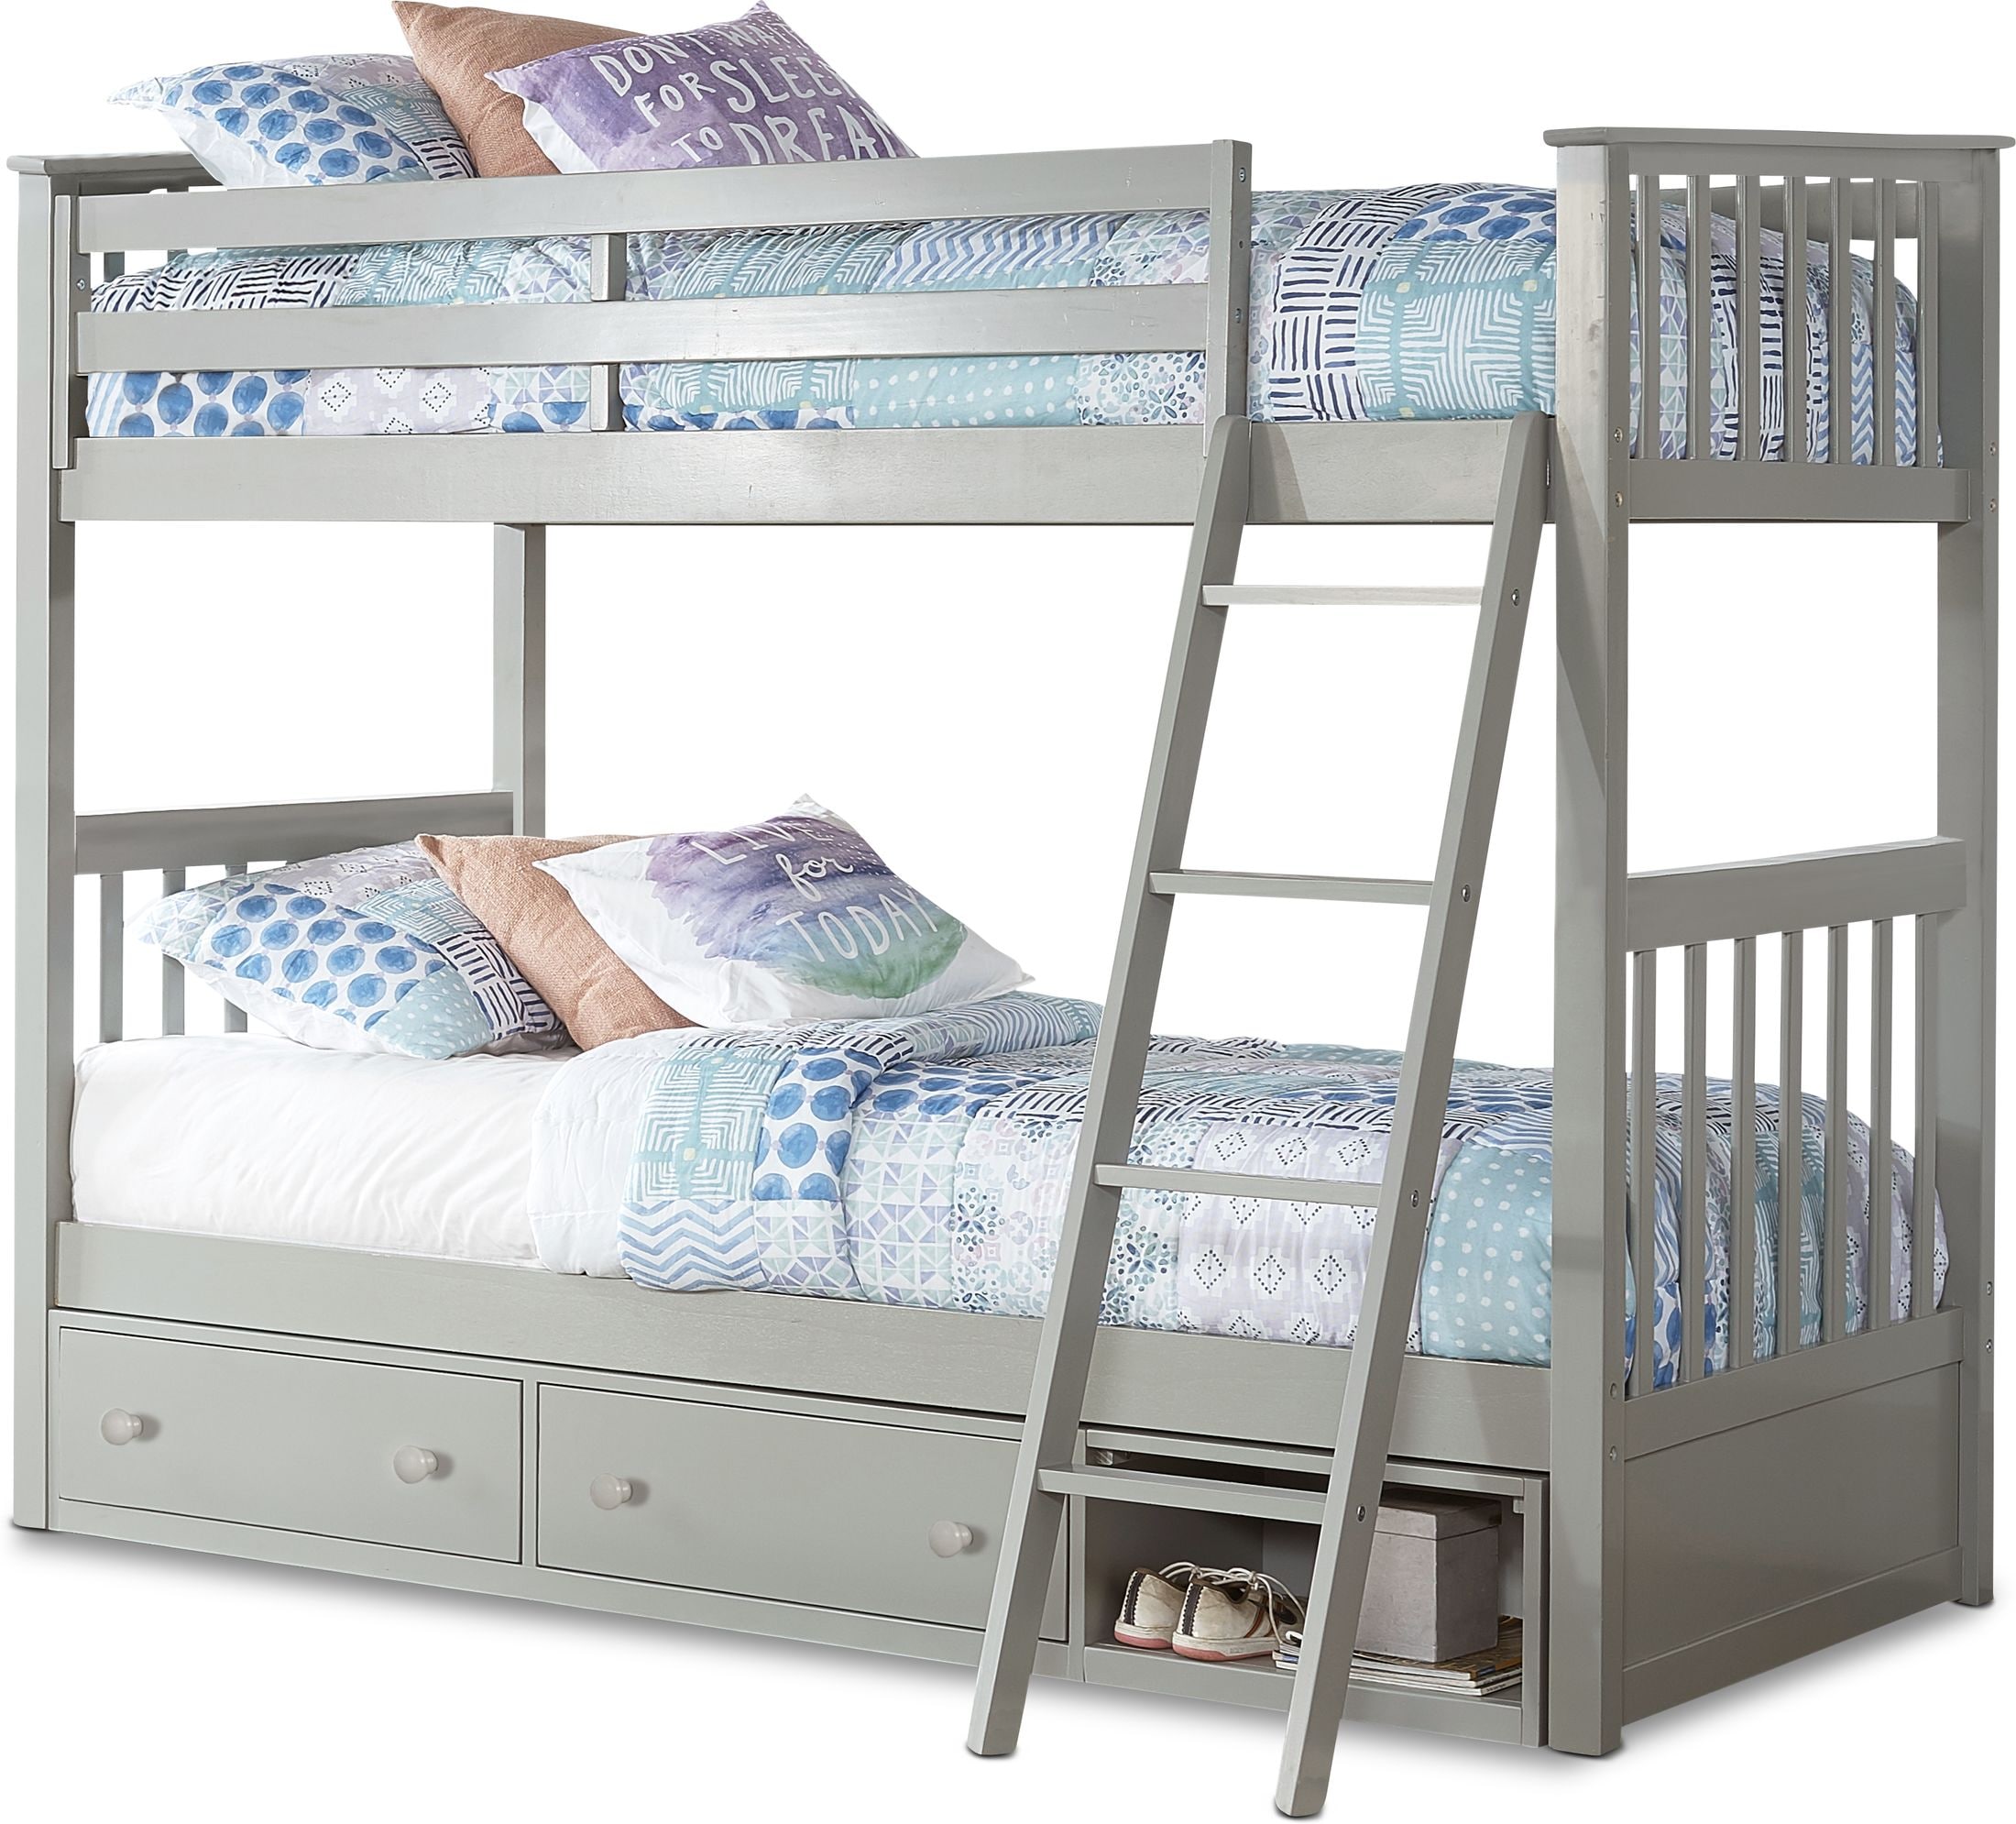 Undefined Value City Furniture, Bunk Bed With Guest Bed And Storage